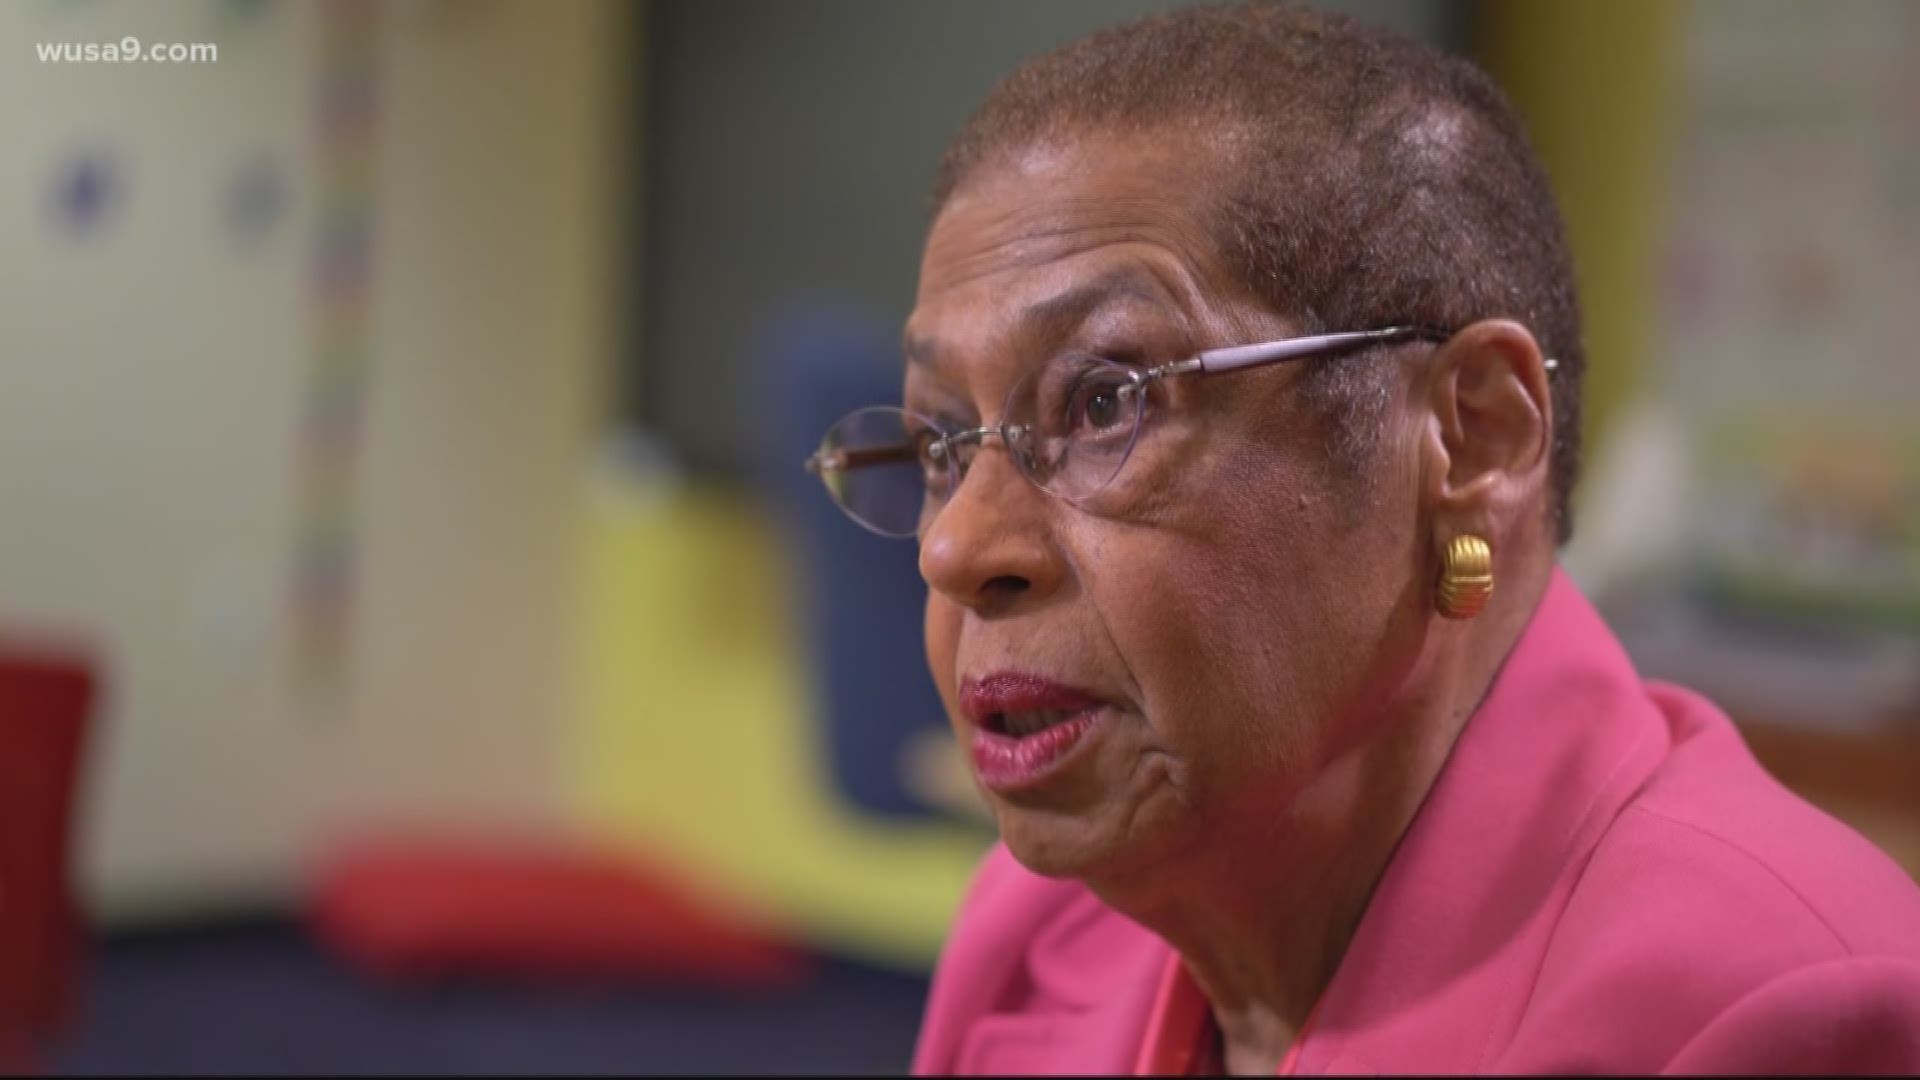 In 1963, Eleanor Norton joined civil rights icon Medgar Evars in Mississippi to register voters. Now she's passing on the legacy to the next generation